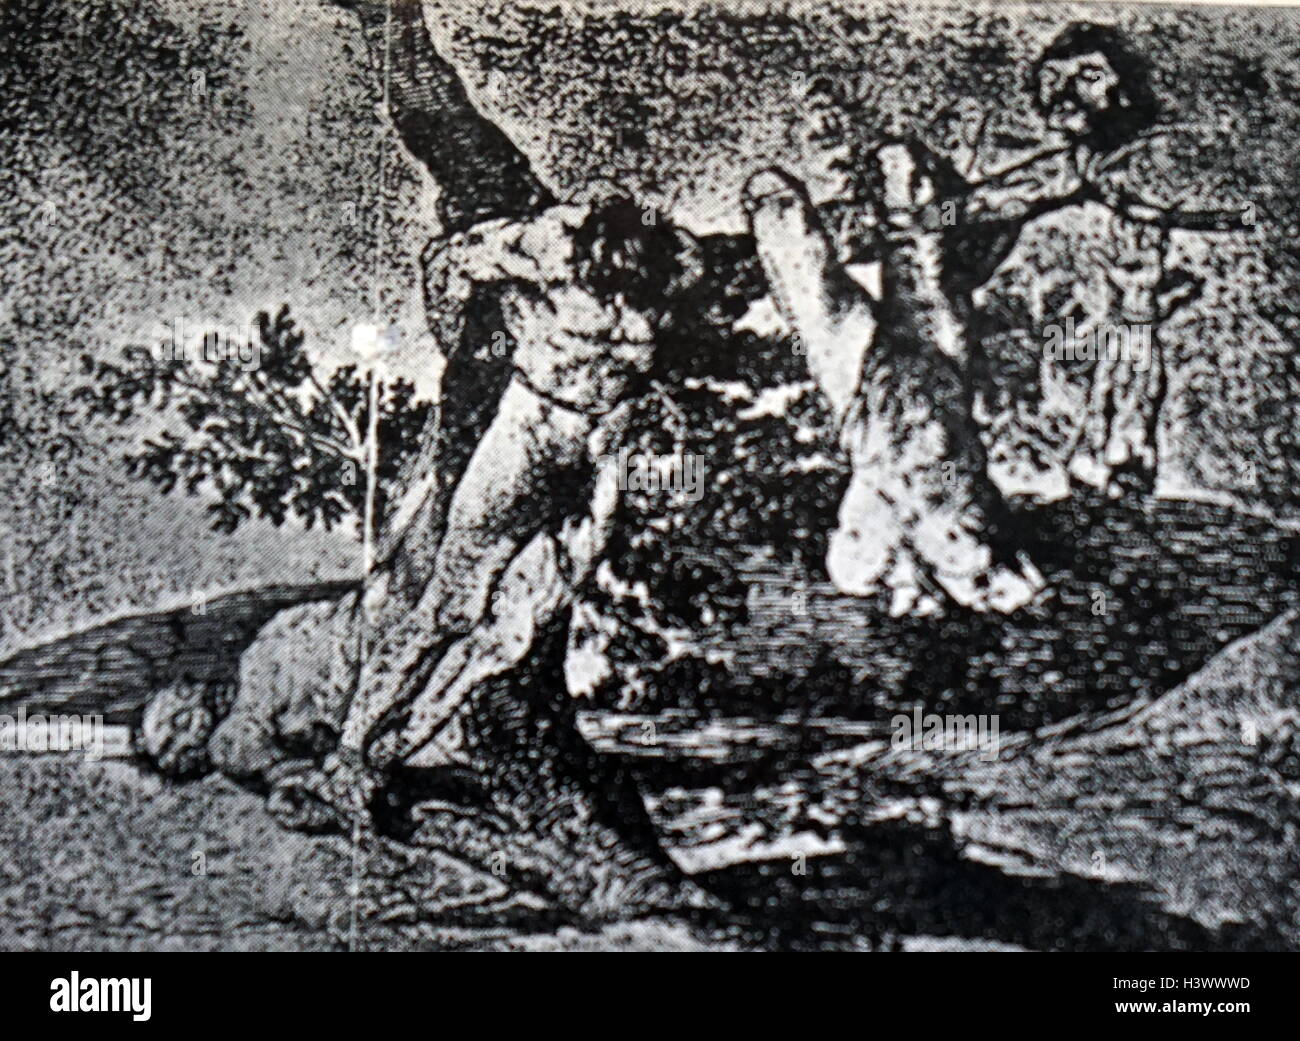 The Disasters of War, by Francisco Goya (1746- 1828) a Spanish romantic painter and printmaker. Dated 19th Century Stock Photo